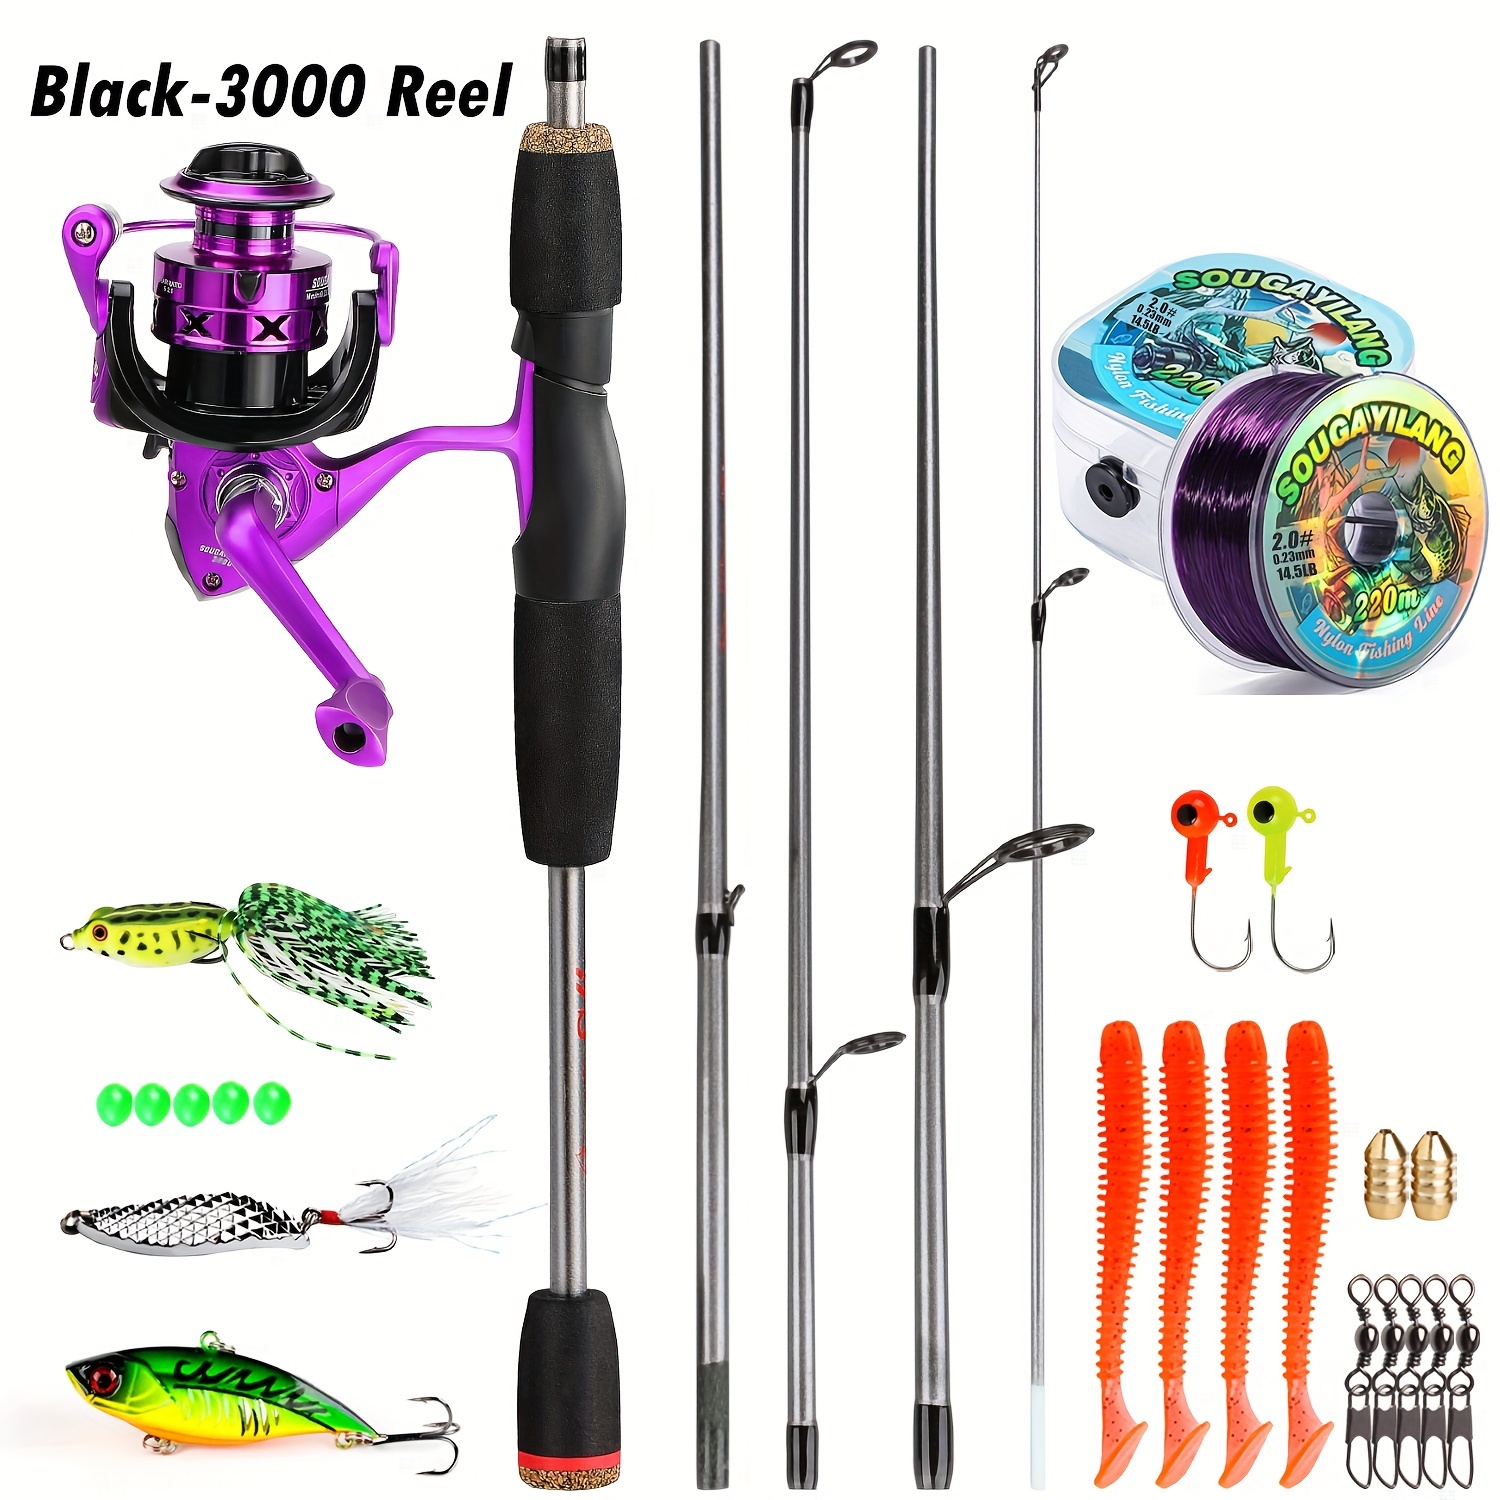 Cheap, Durable, and Sturdy Fishing Rod Set For All 